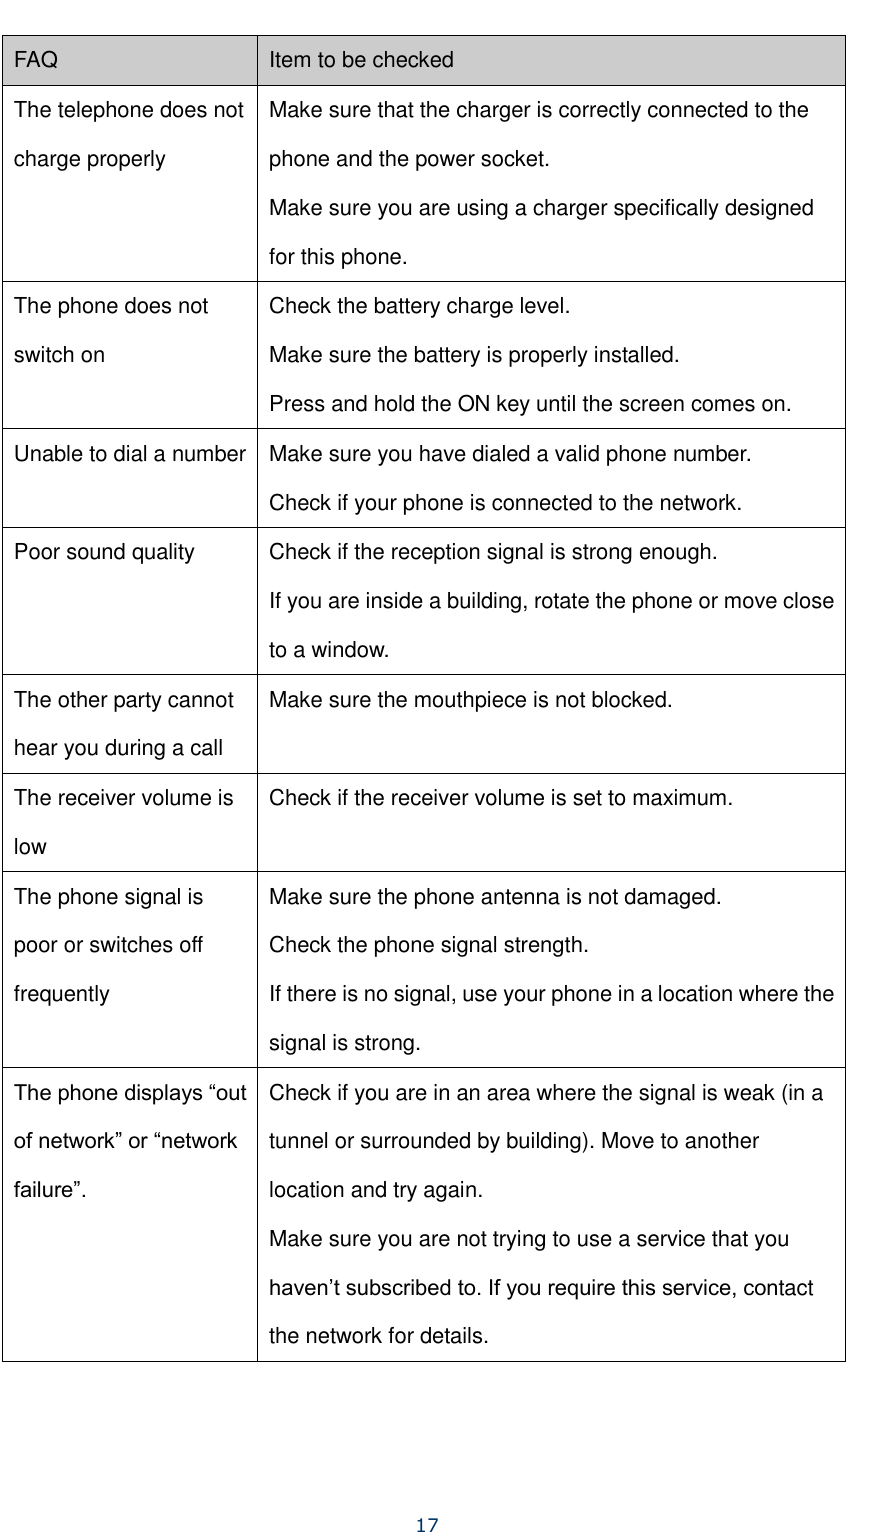     17  FAQ Item to be checked The telephone does not charge properly Make sure that the charger is correctly connected to the phone and the power socket. Make sure you are using a charger specifically designed for this phone. The phone does not switch on Check the battery charge level. Make sure the battery is properly installed. Press and hold the ON key until the screen comes on. Unable to dial a number Make sure you have dialed a valid phone number. Check if your phone is connected to the network. Poor sound quality Check if the reception signal is strong enough. If you are inside a building, rotate the phone or move close to a window. The other party cannot hear you during a call Make sure the mouthpiece is not blocked. The receiver volume is low Check if the receiver volume is set to maximum. The phone signal is poor or switches off frequently Make sure the phone antenna is not damaged. Check the phone signal strength. If there is no signal, use your phone in a location where the signal is strong. The phone displays “out of network” or “network failure”. Check if you are in an area where the signal is weak (in a tunnel or surrounded by building). Move to another location and try again. Make sure you are not trying to use a service that you haven’t subscribed to. If you require this service, contact the network for details. 